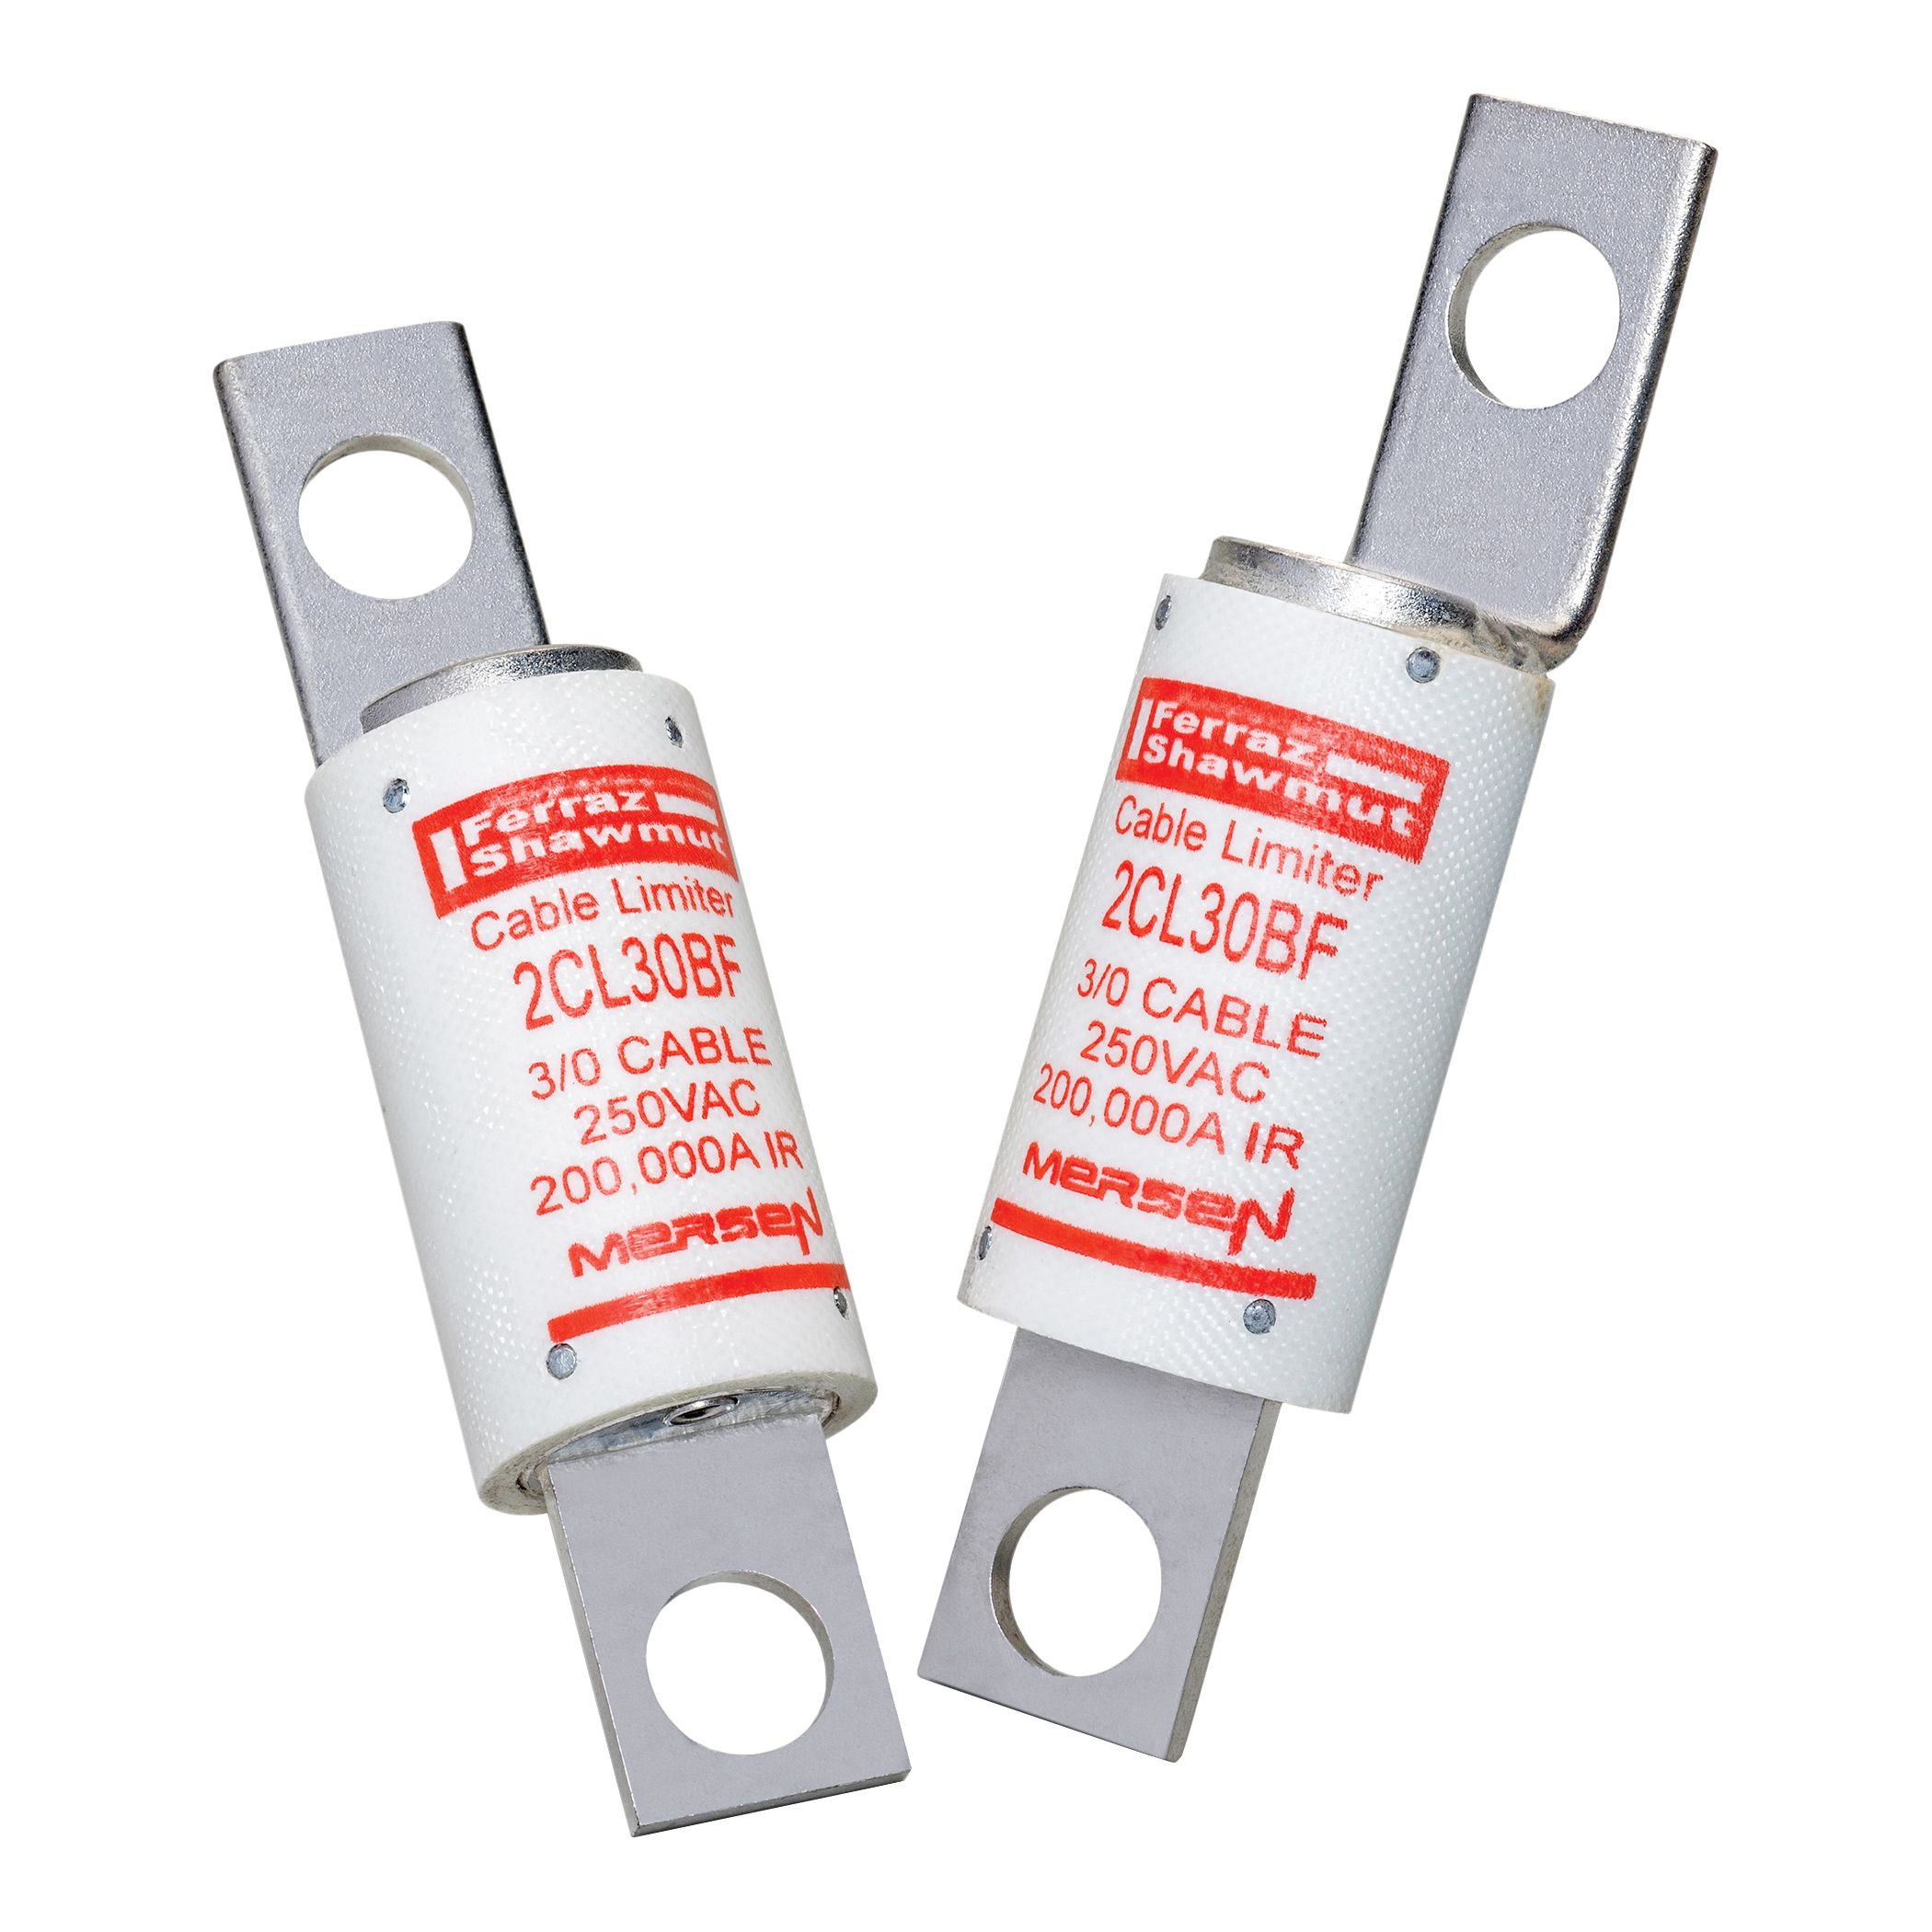 2CL250BB - Cable Protector Fuse 250V 250 MCM Blade To Blade Mount 2CL Series